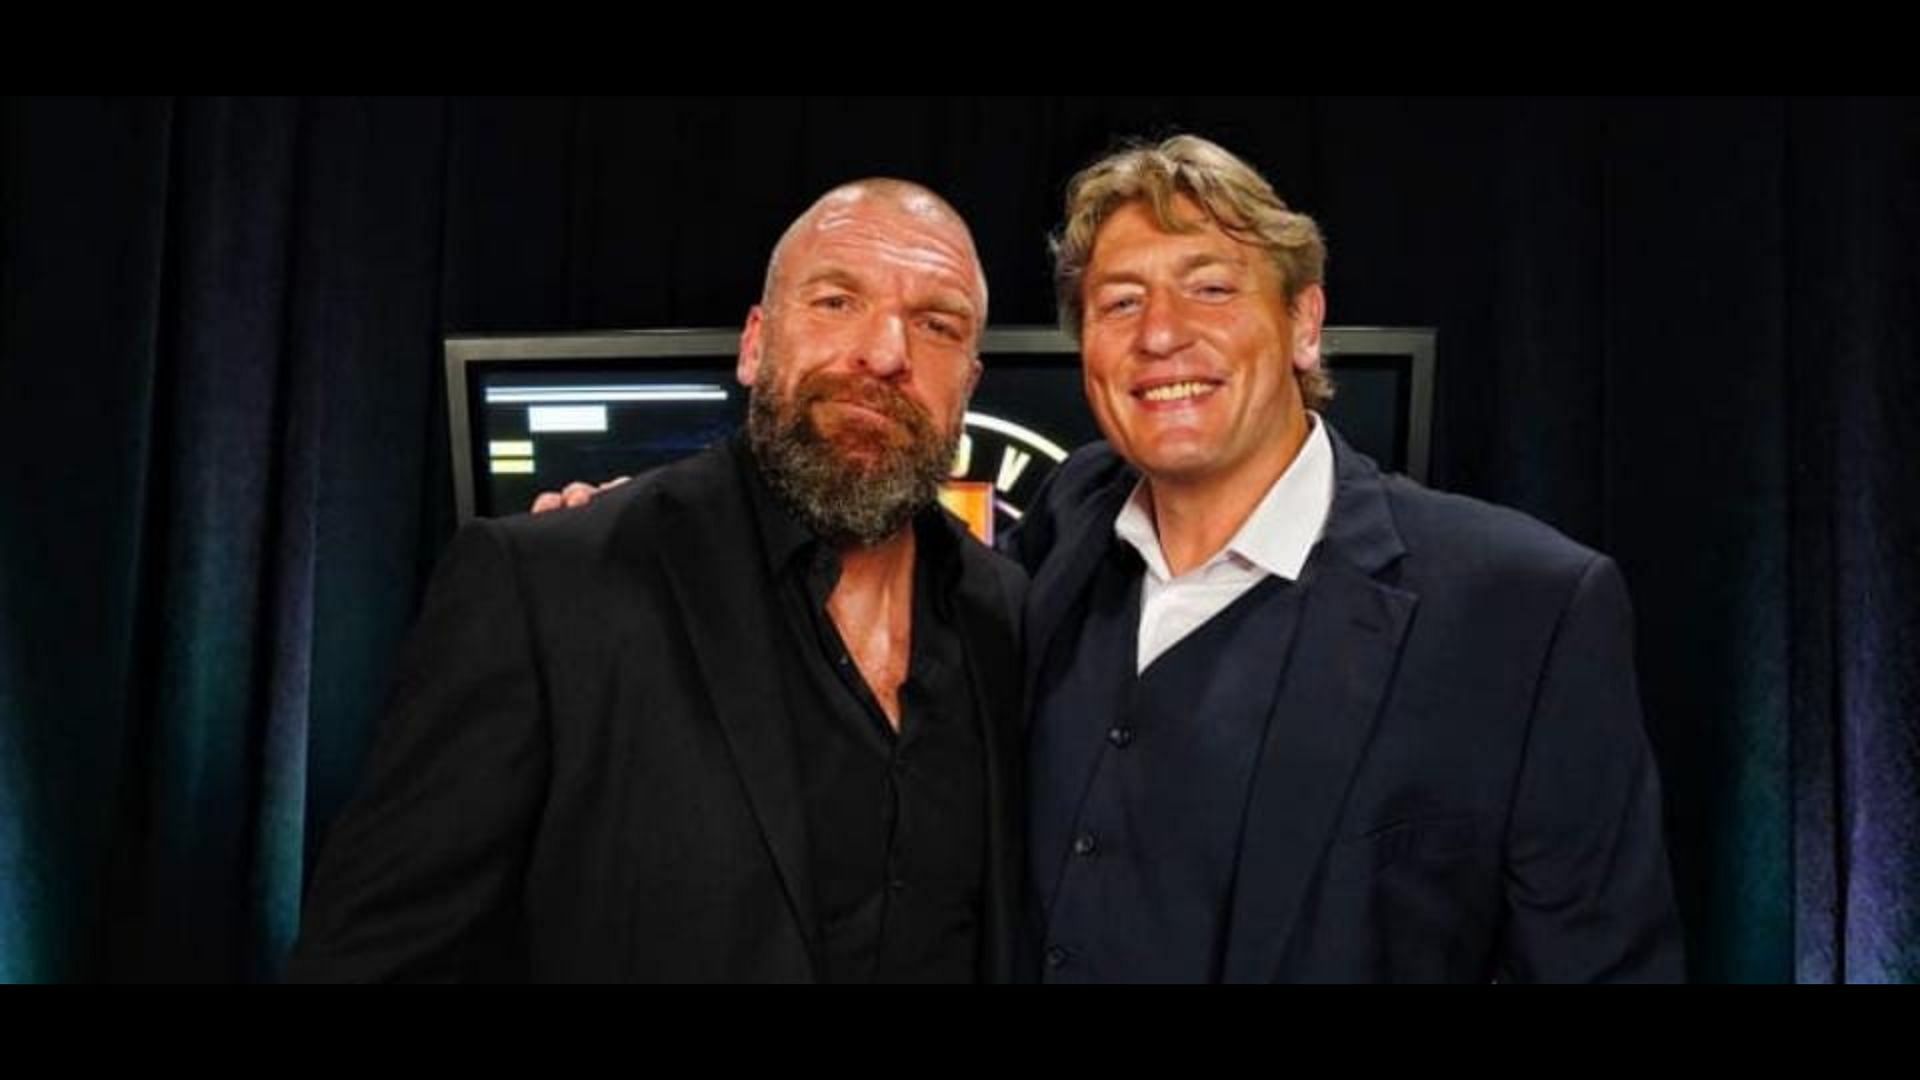 William Regal is confirmed to be having a new role in WWE